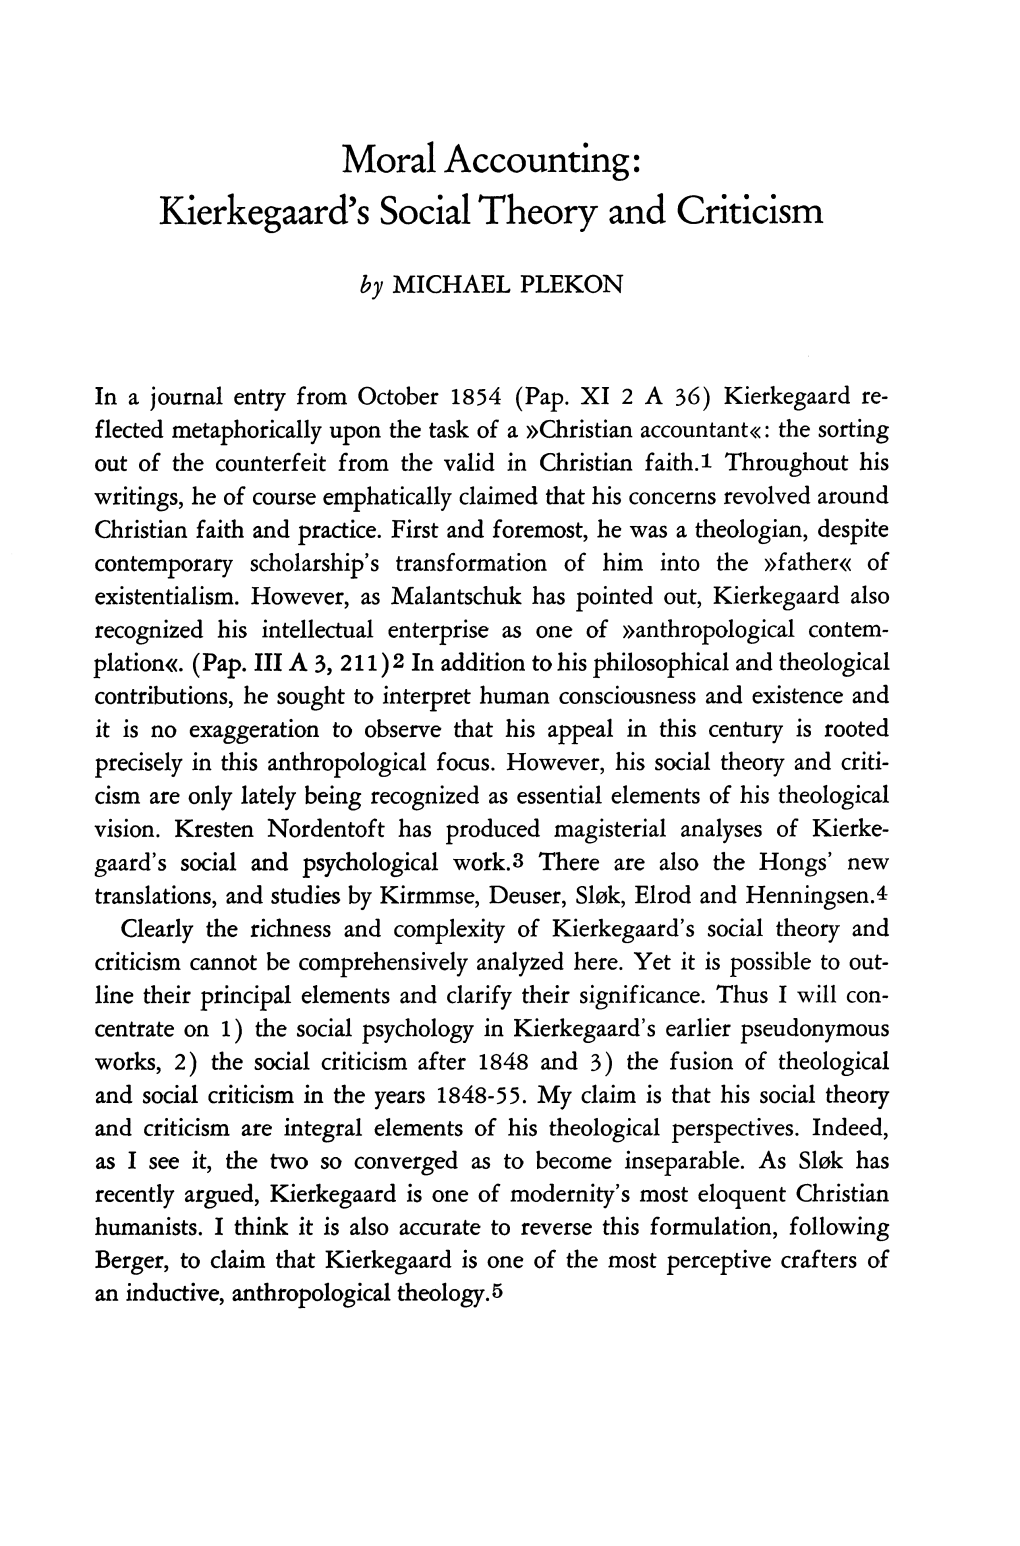 Kierkegaard's Social Theory and Criticism